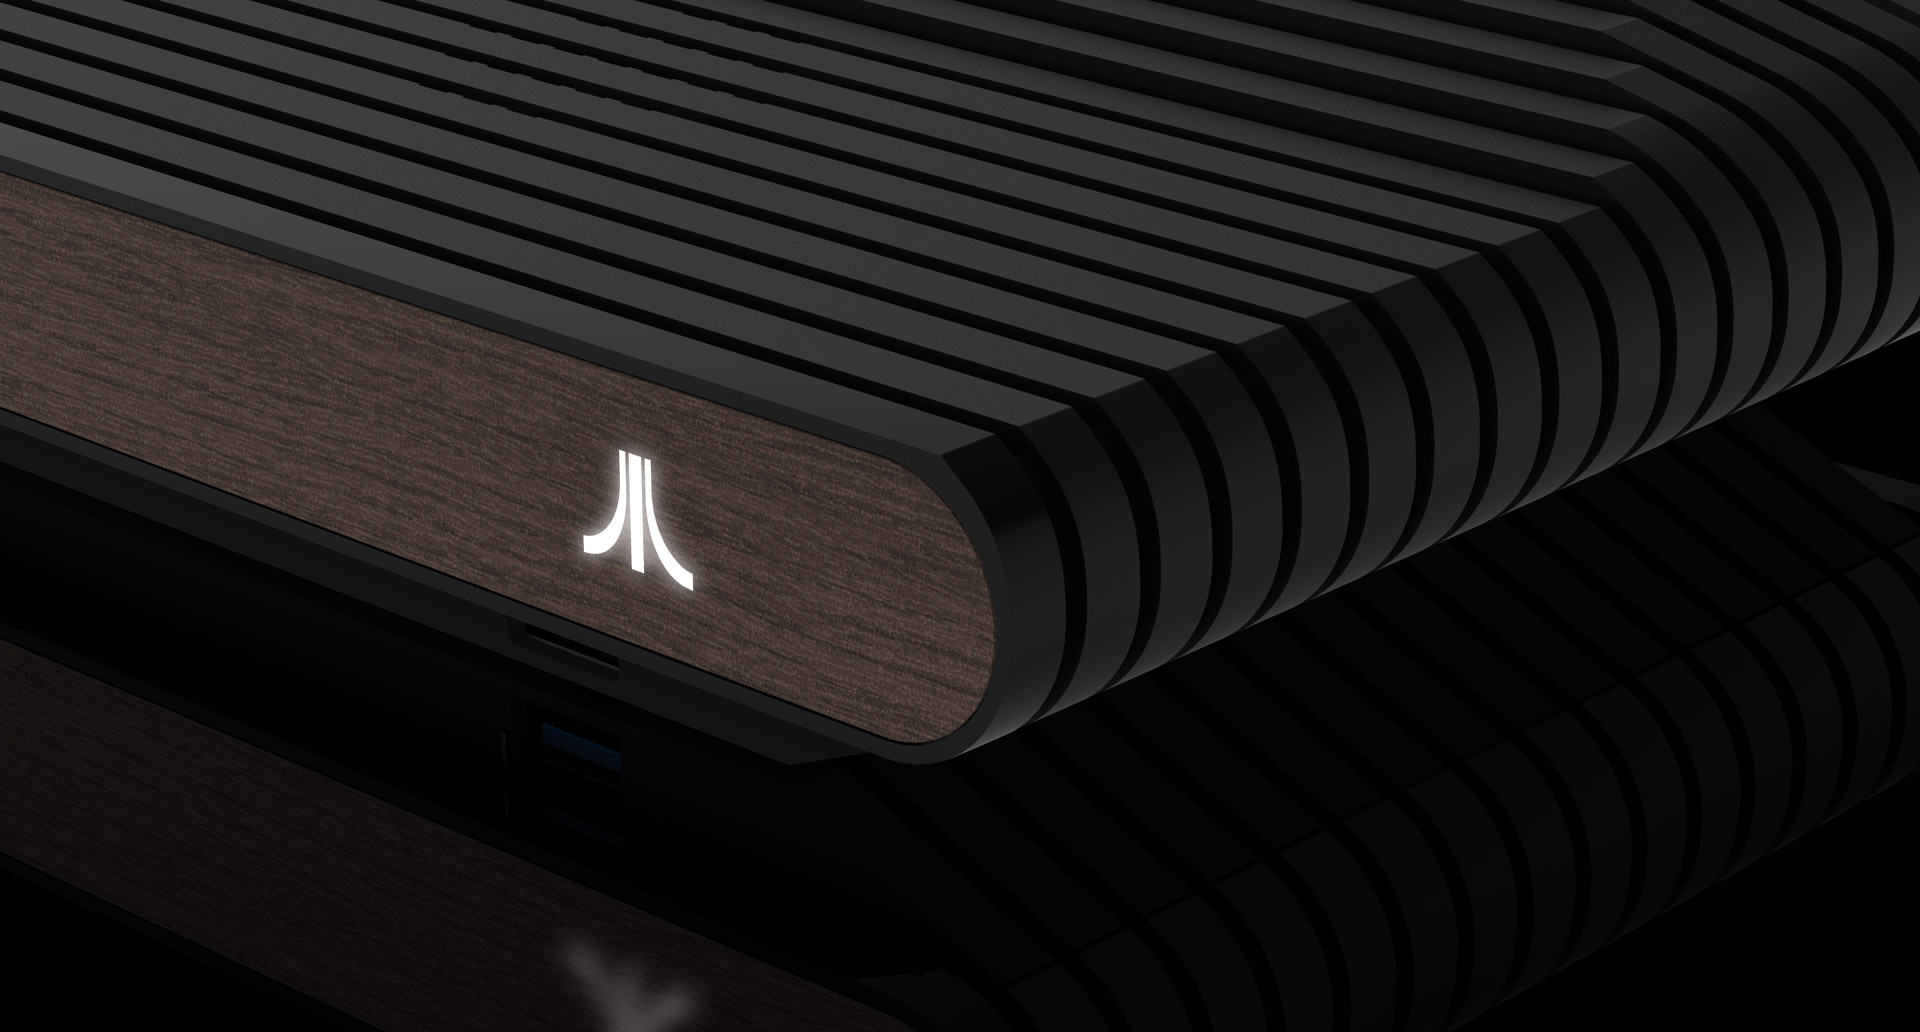  Atari VCS consoles finally 'on the way' after significant delays 